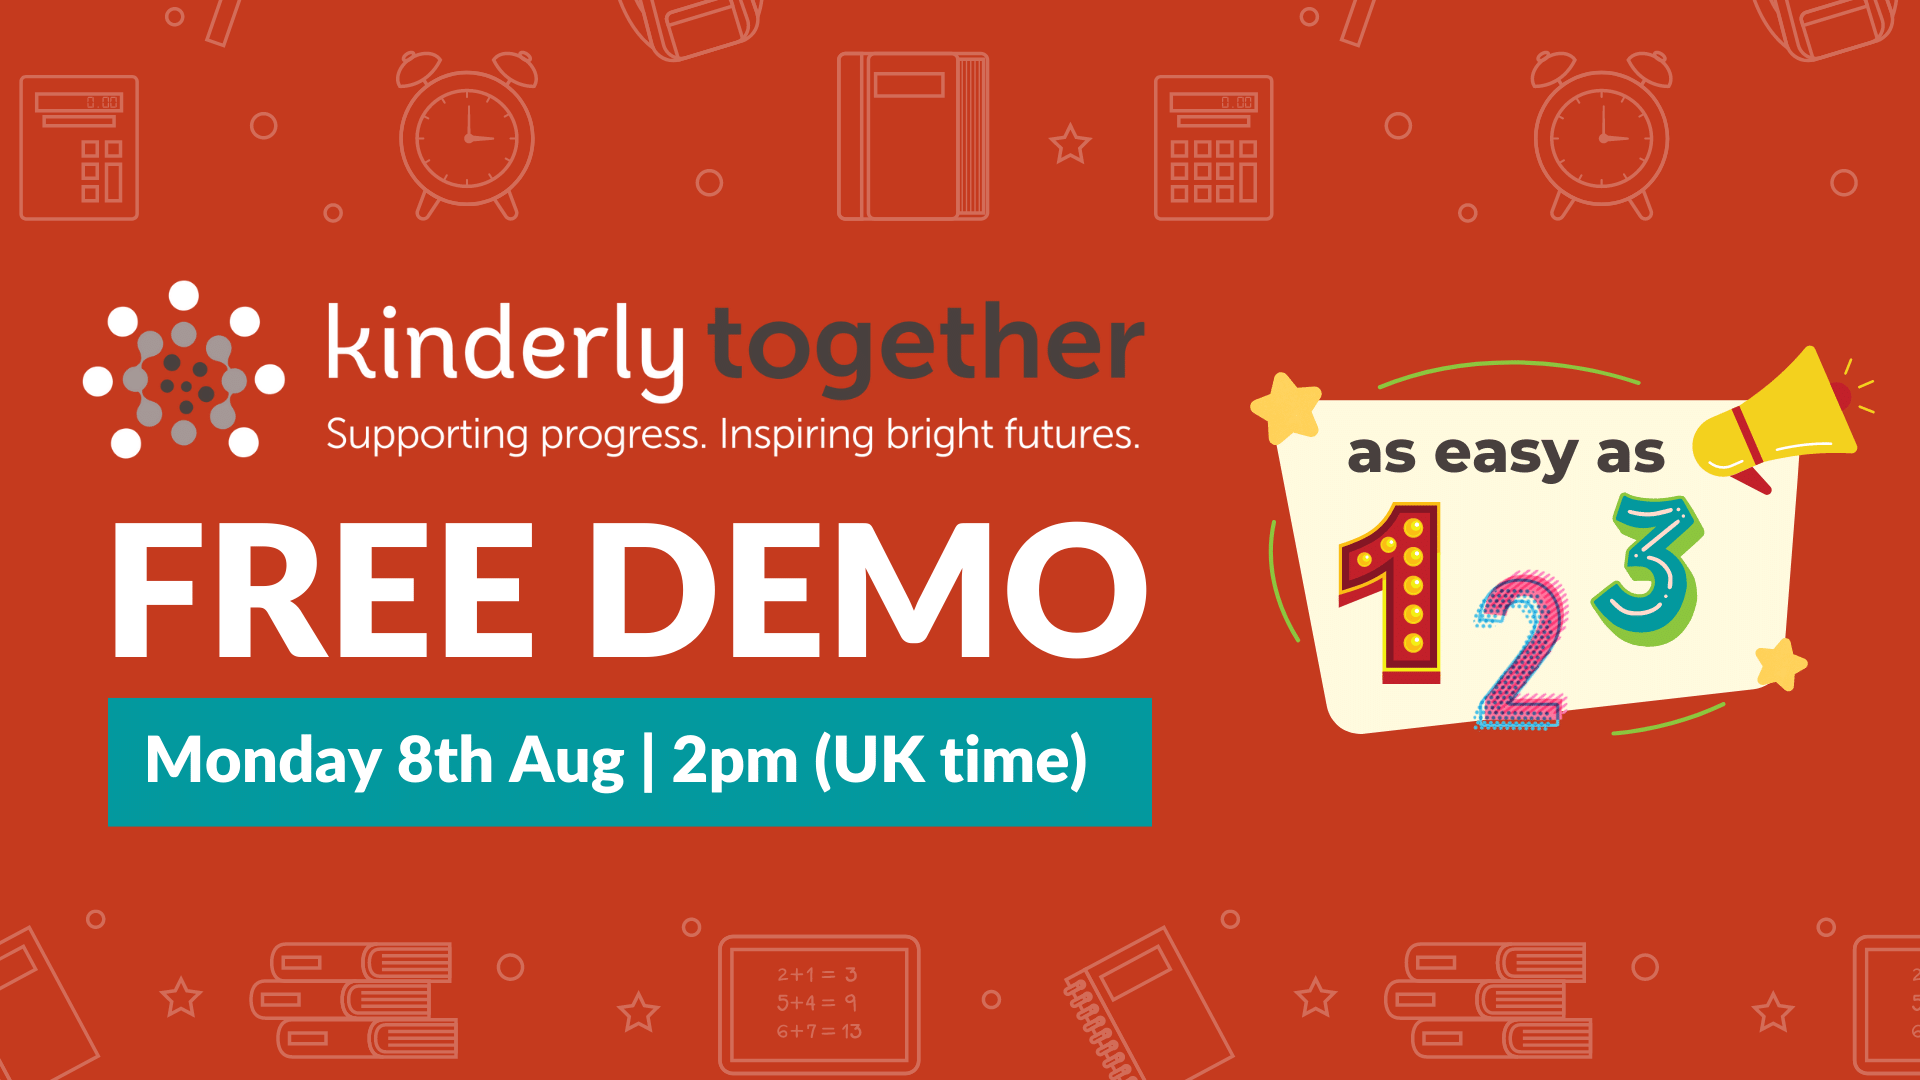 kinderly together free demo 8th august